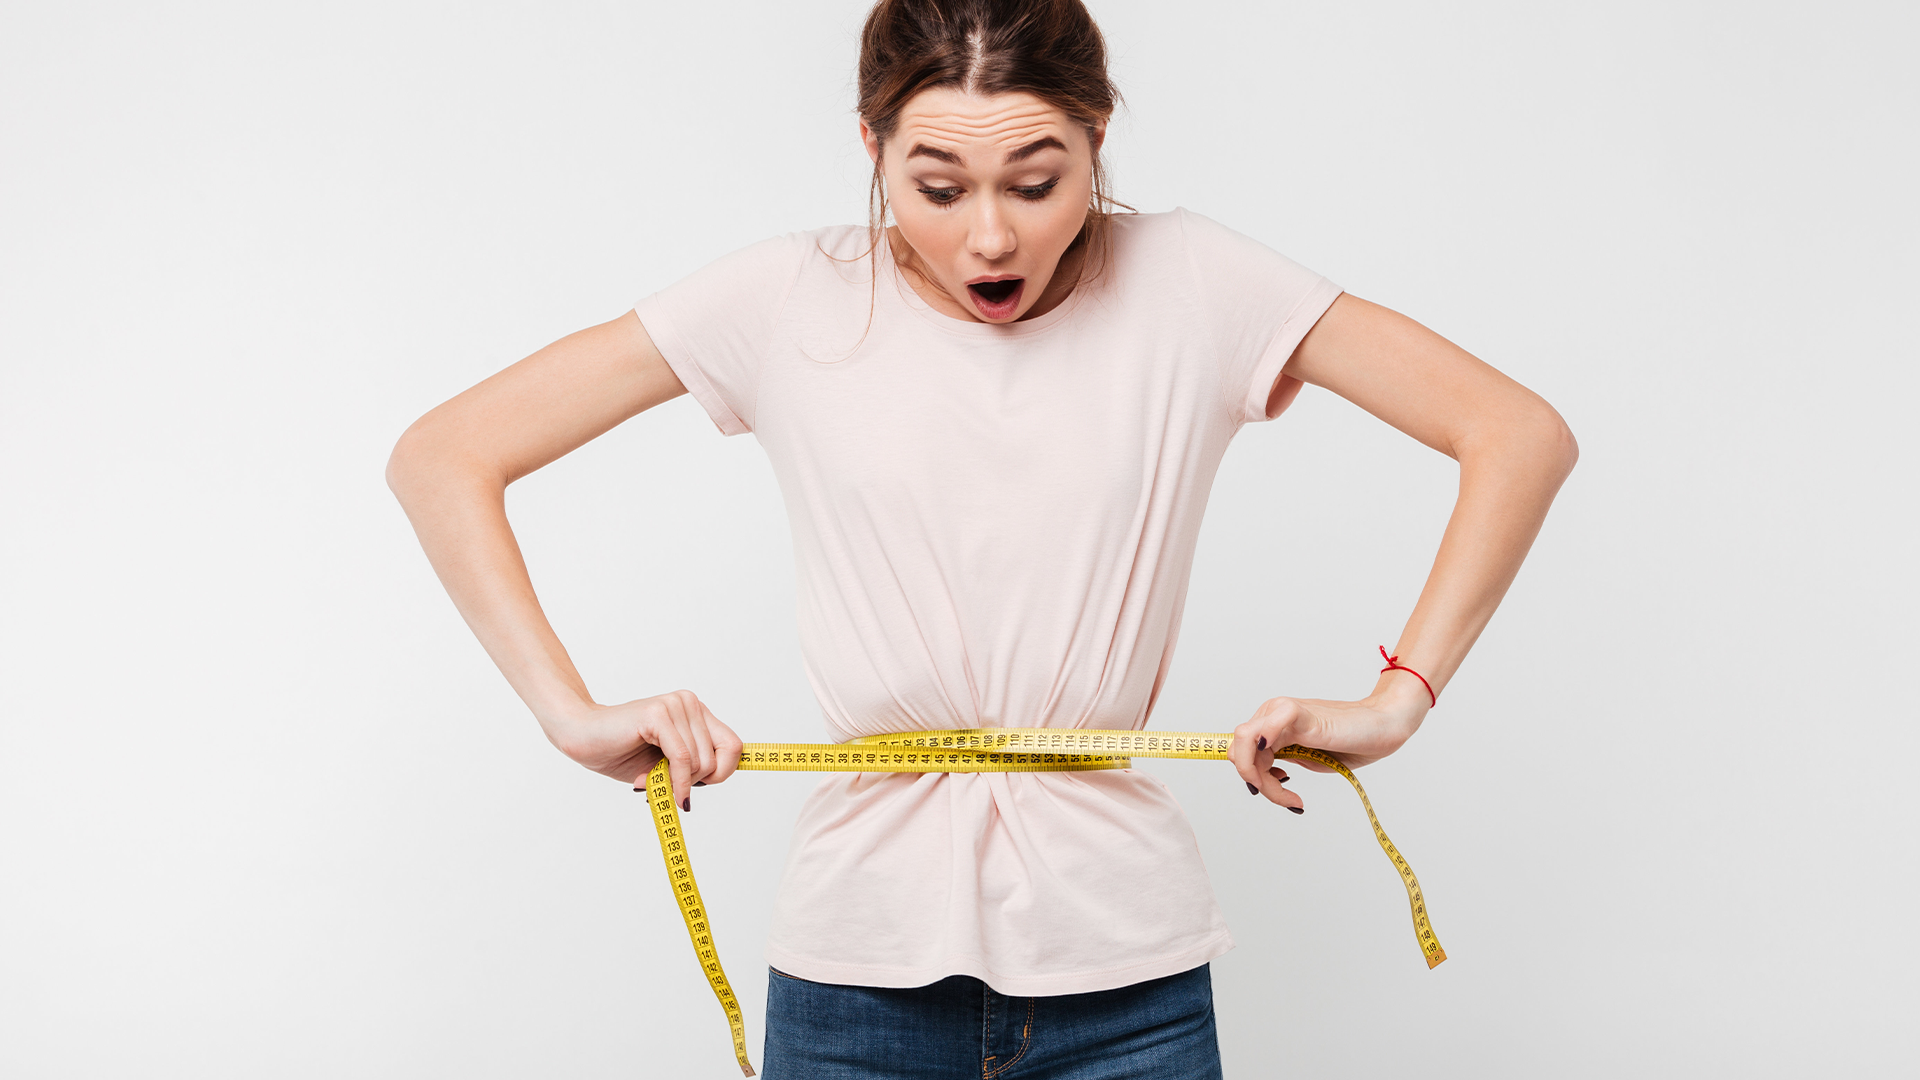 Weight Loss Indianapolis